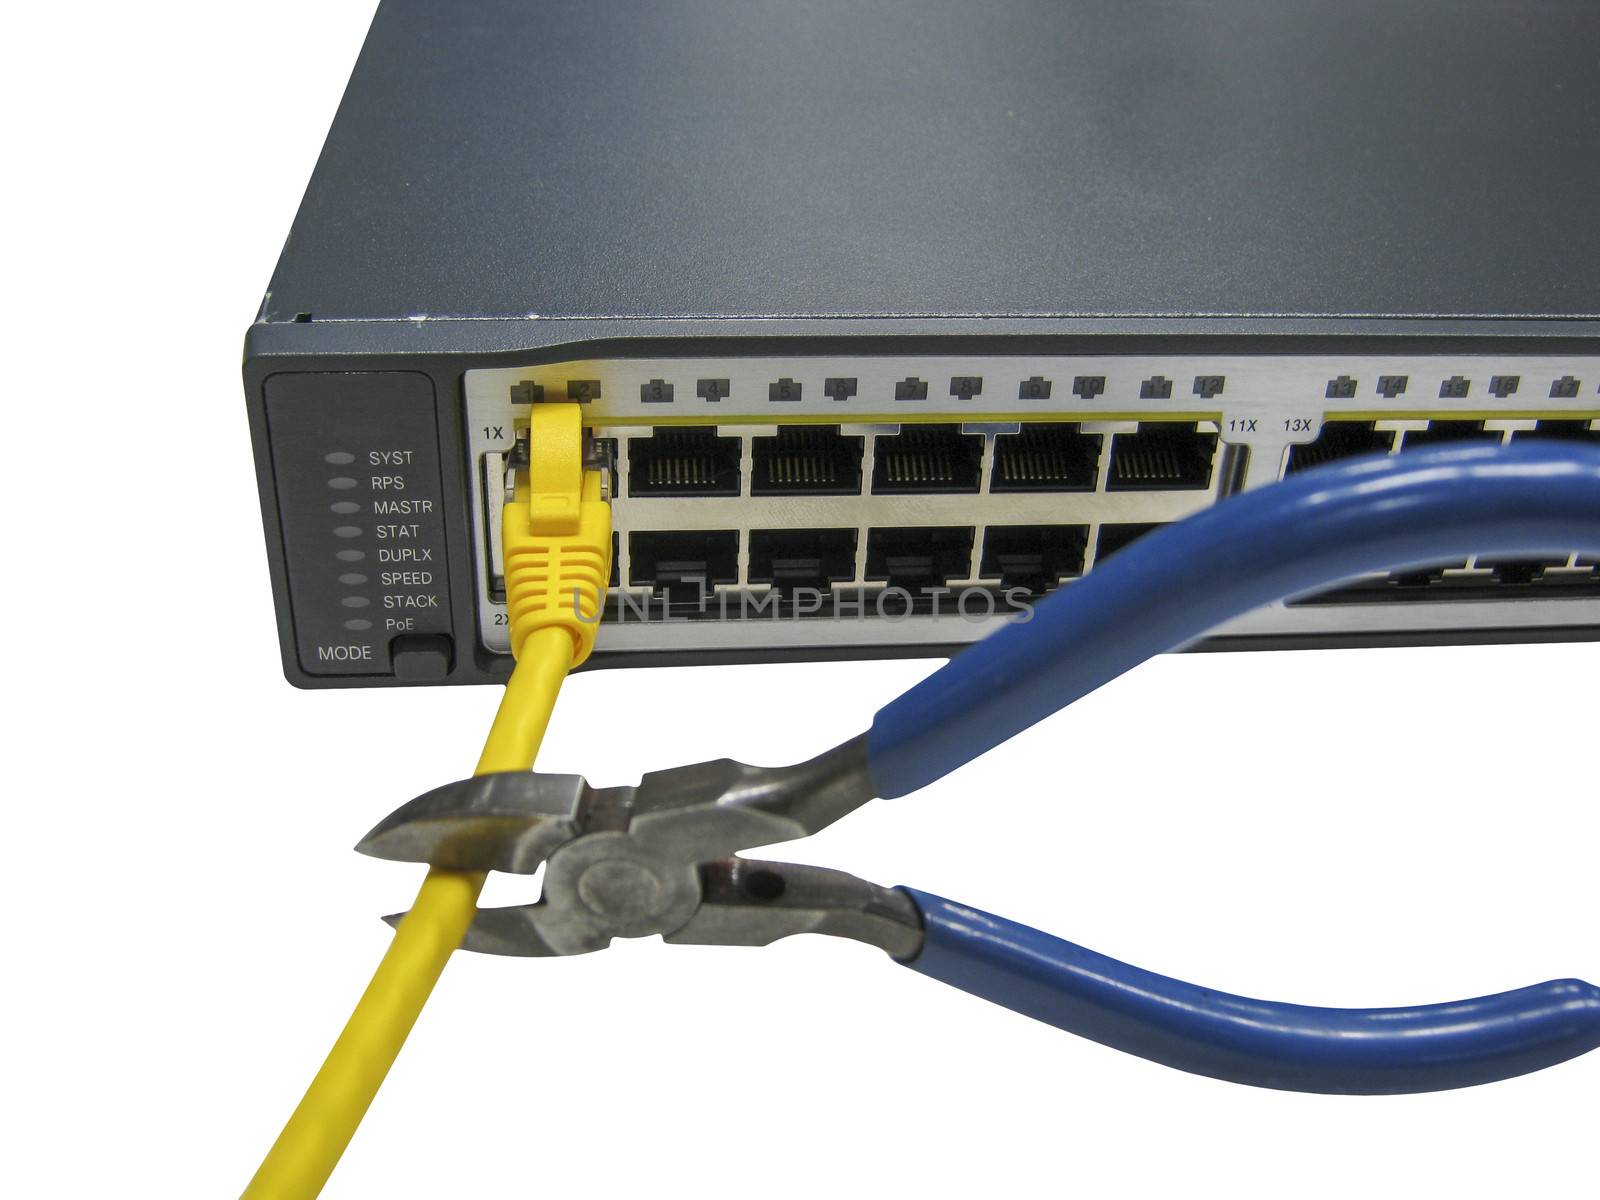 Cut ethernet cables connected to servers by Sorapop